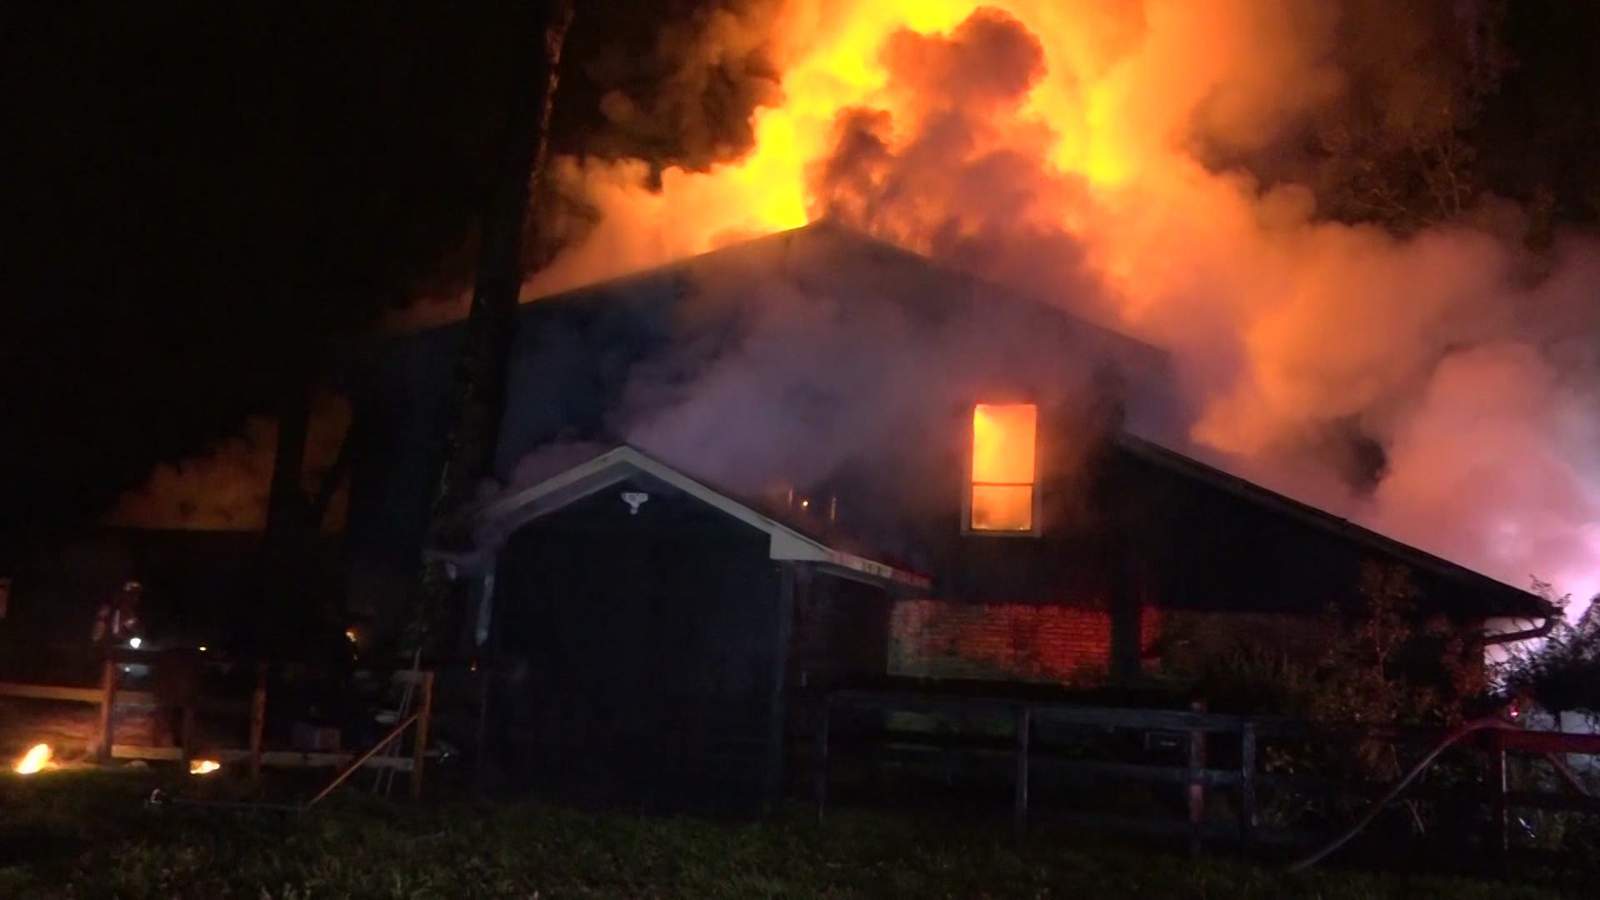 Family left homeless after fire engulfs 5,000-square-foot home